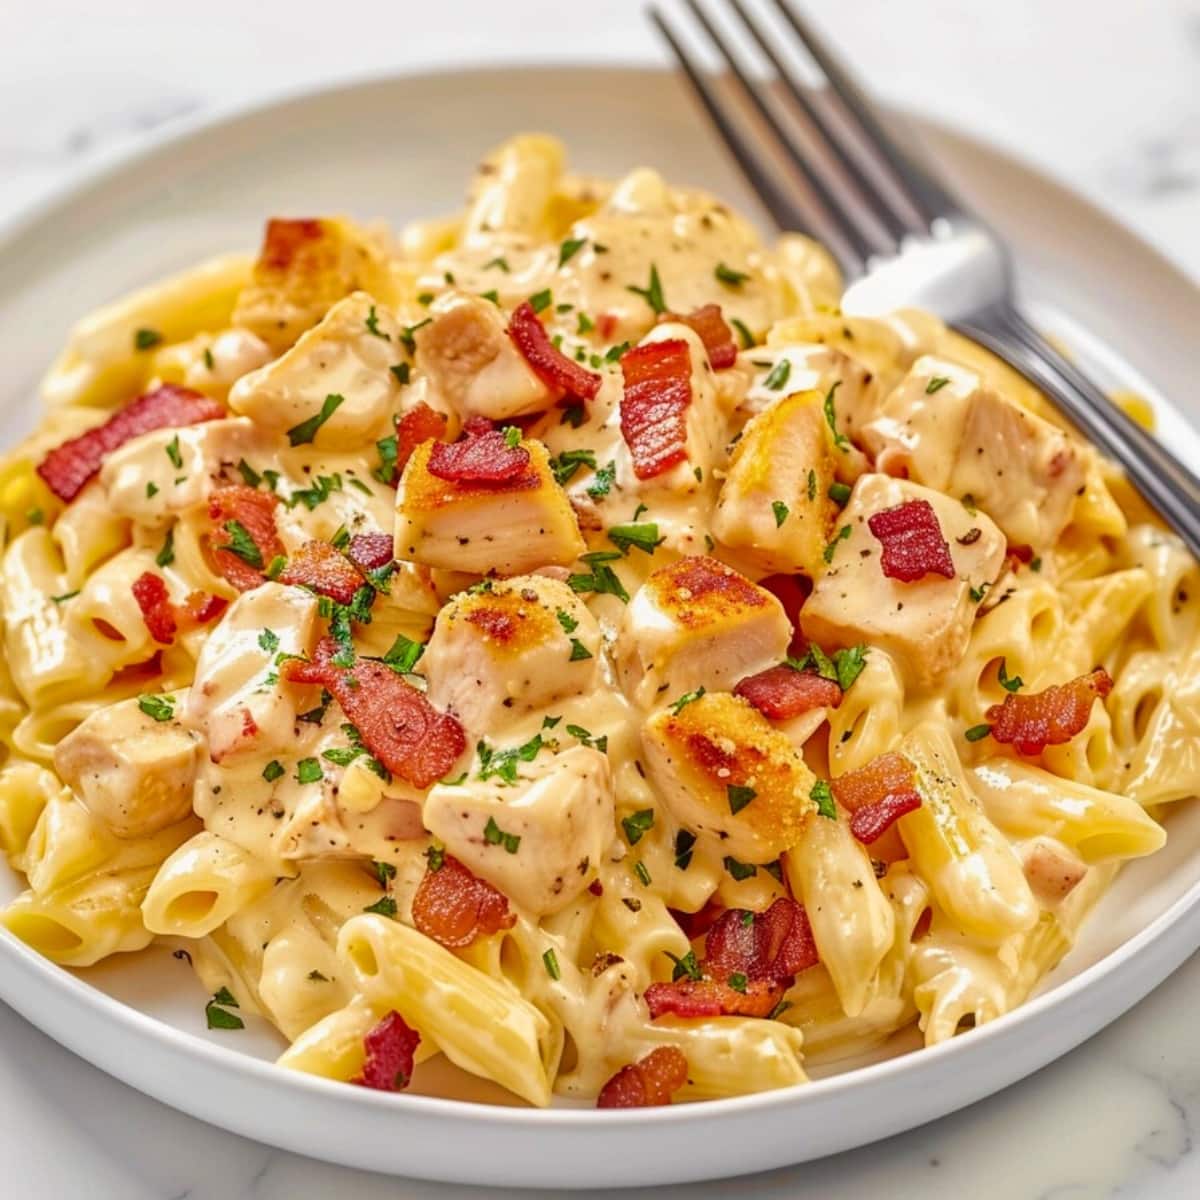 Cheesy Crack penne pasta served in a plate garnished with fried bacon.